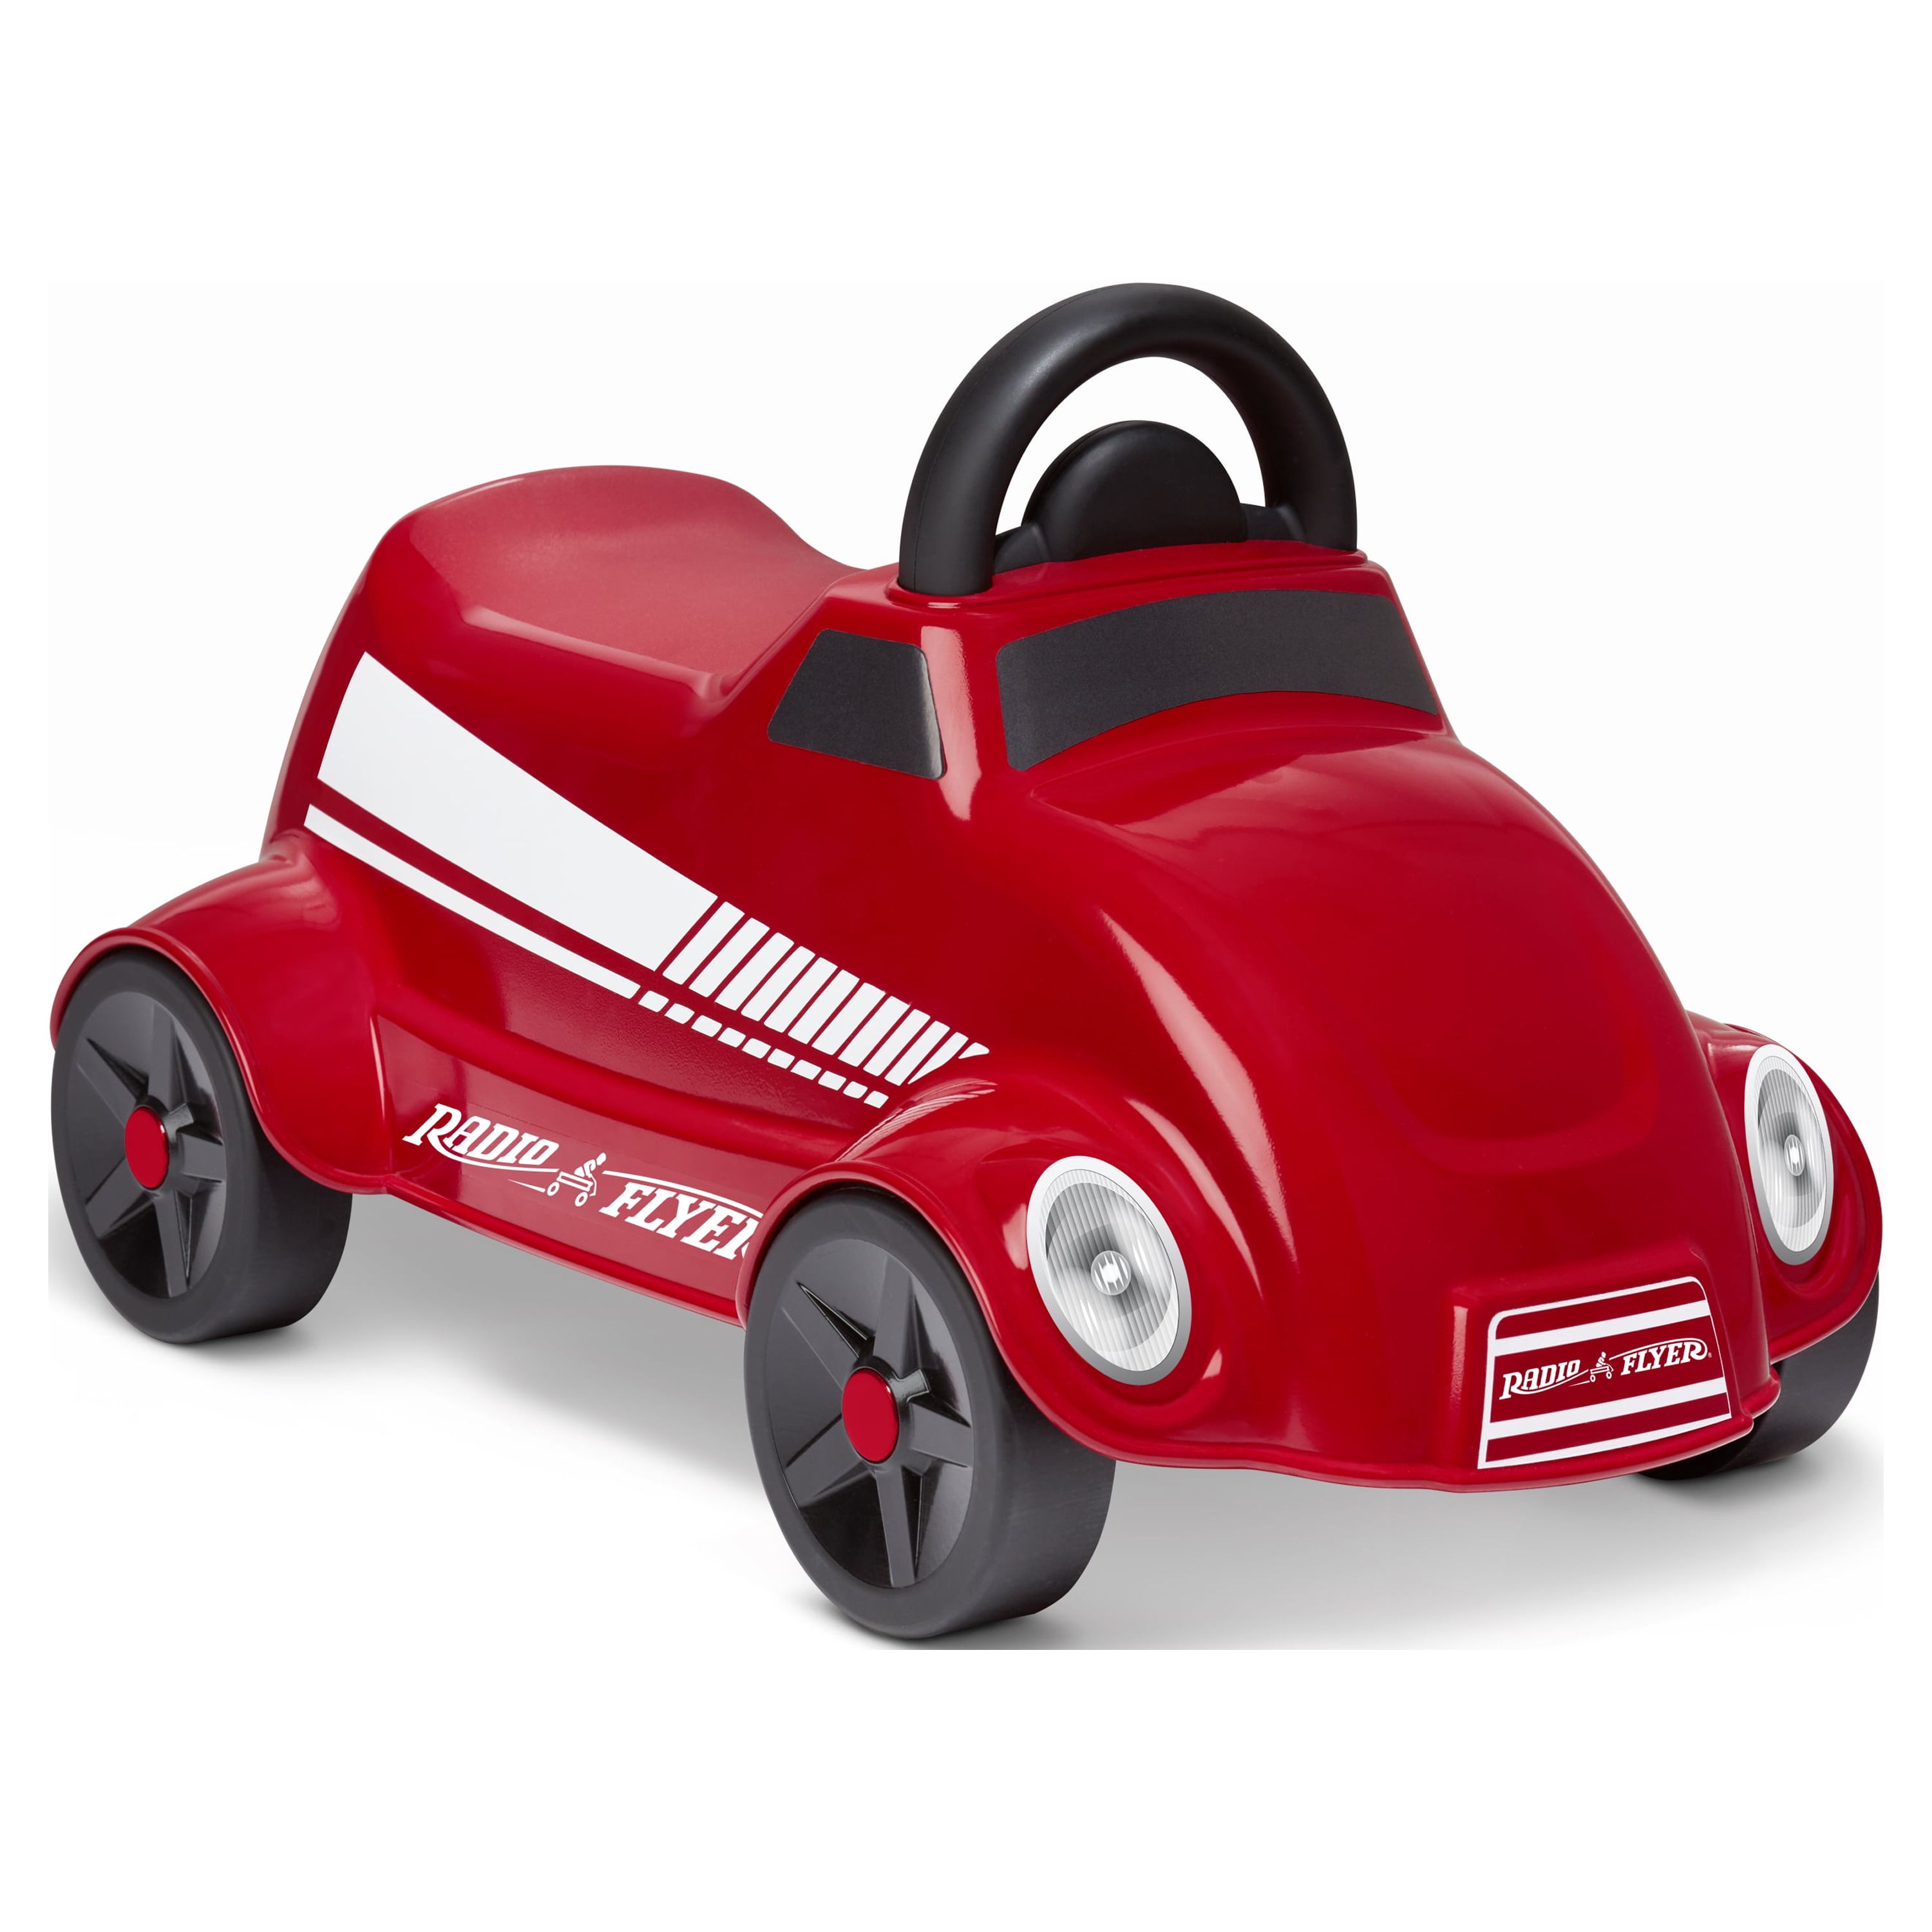 Radio Flyer, My 1st Race Car, Ride-on for Kids, Red, Kids 1-3 Years - image 1 of 7